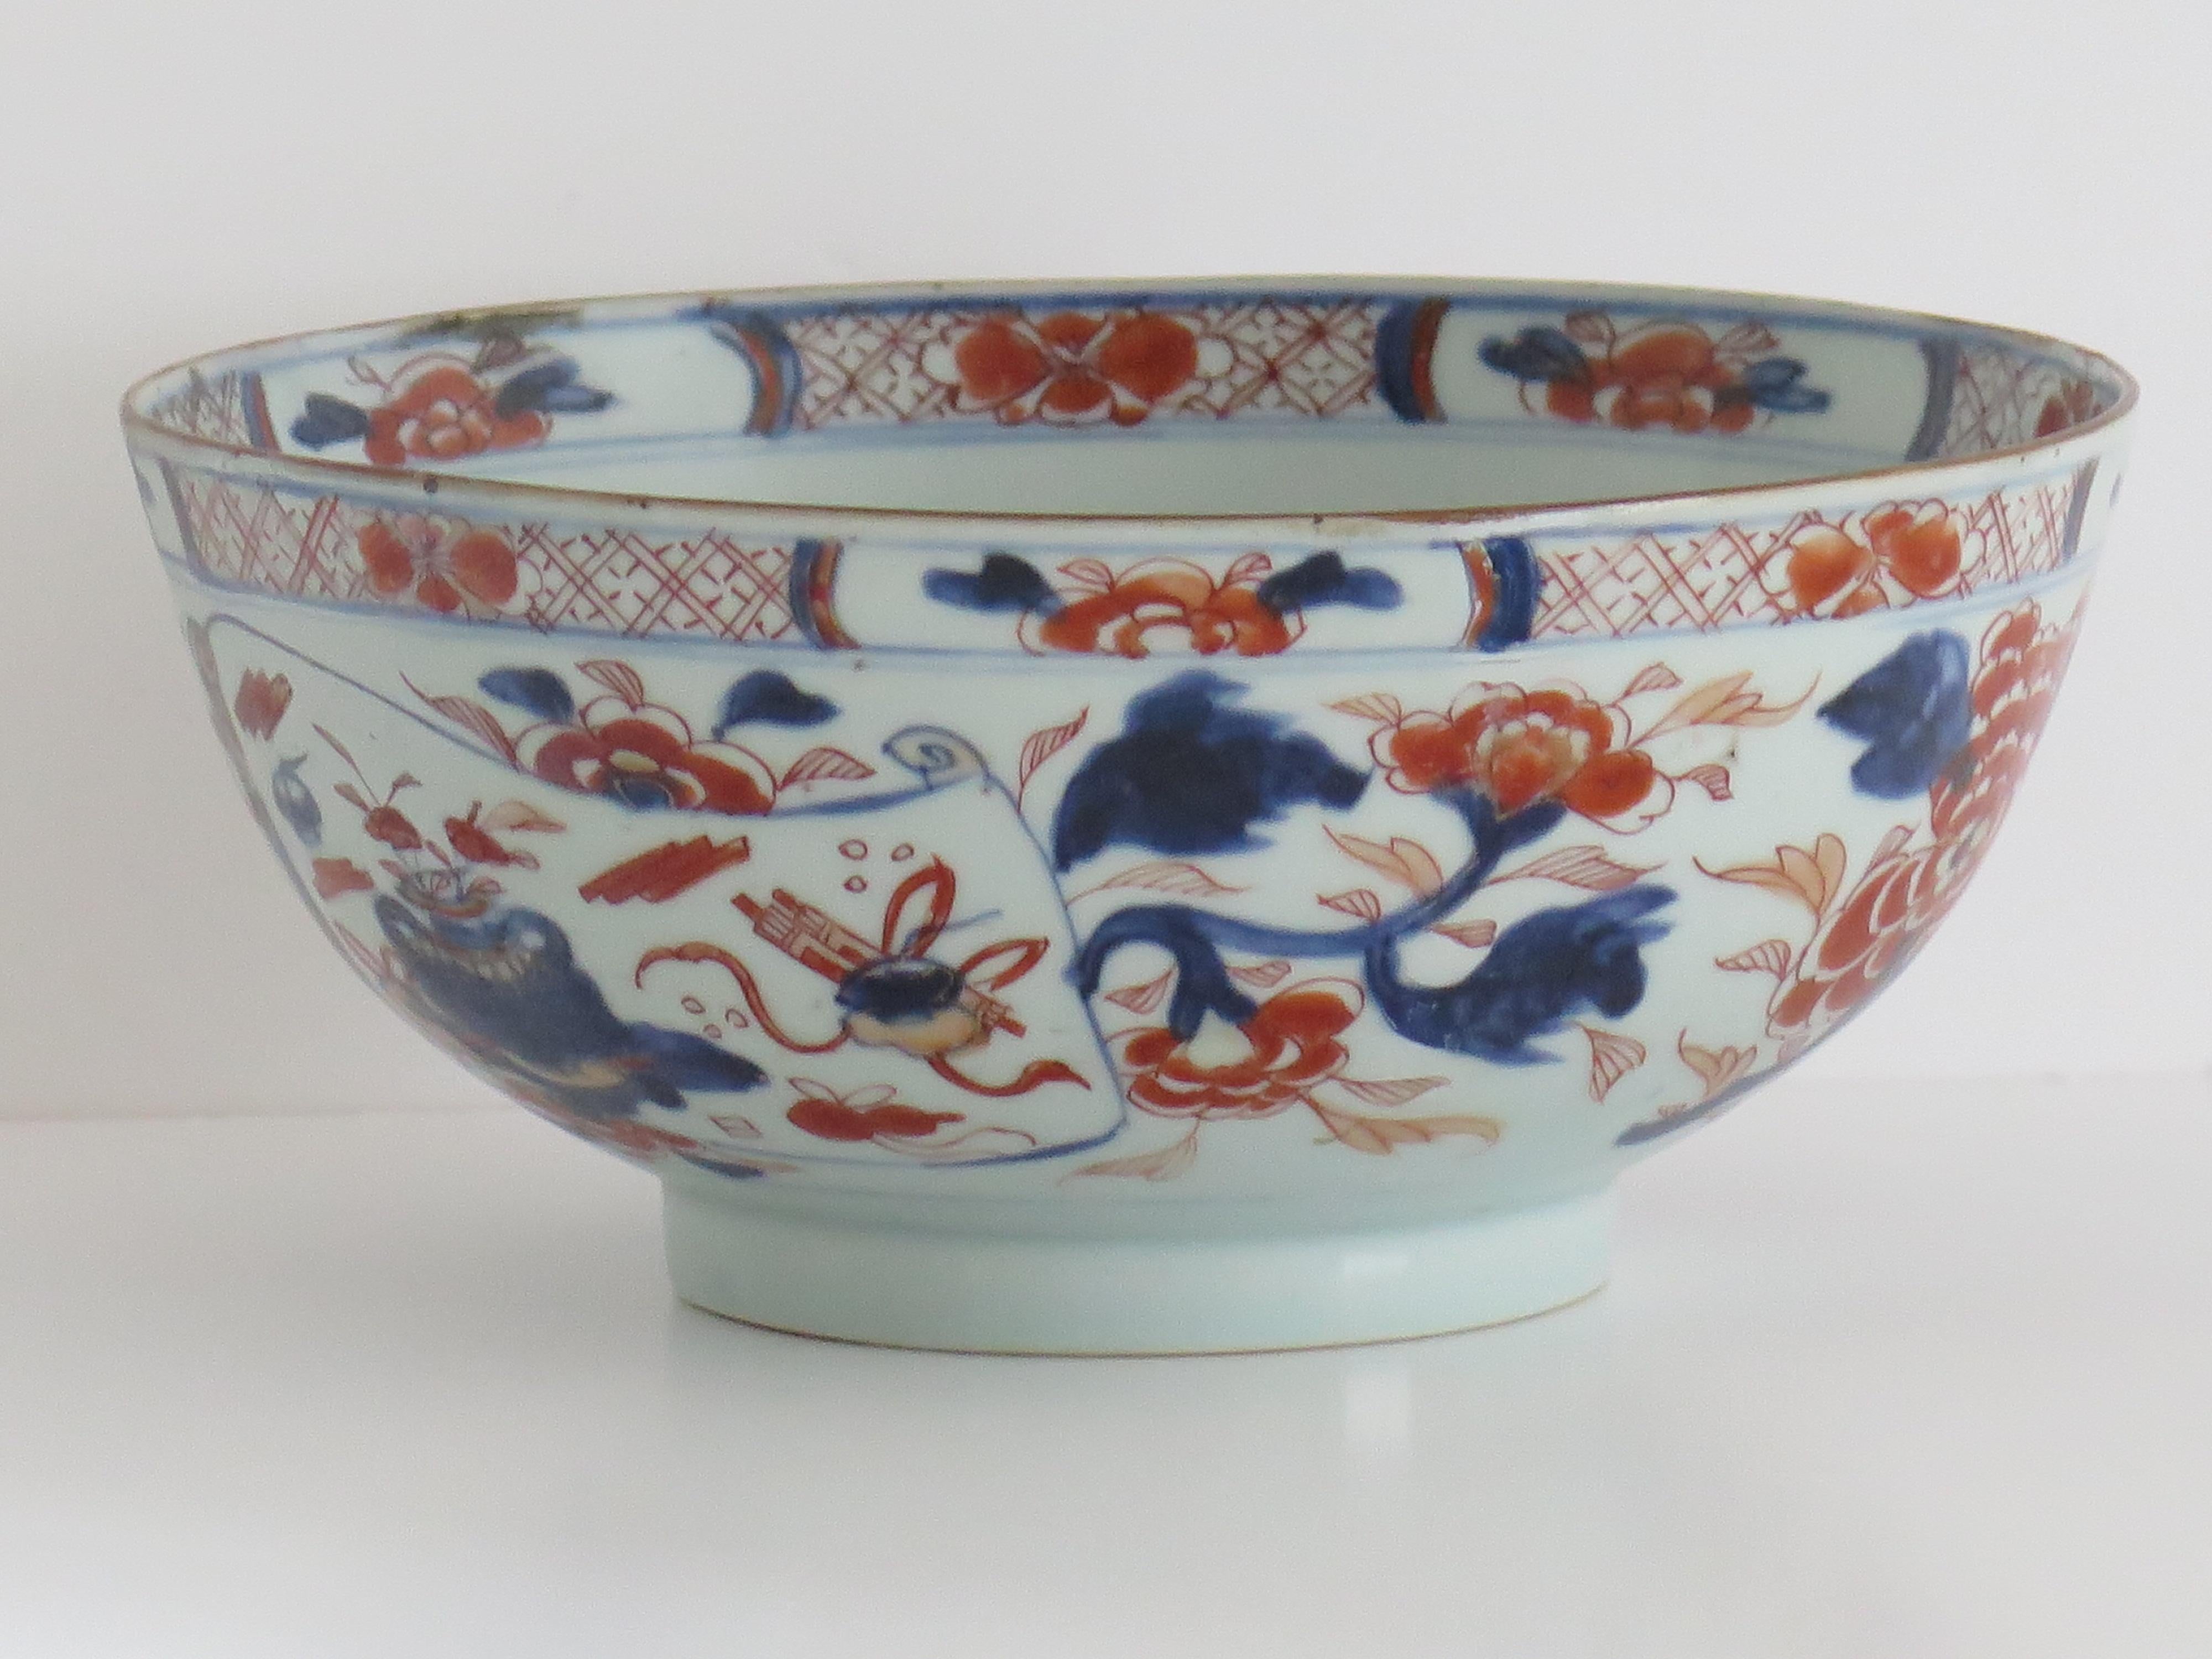 This is a beautiful Chinese Export porcelain footed Bowl with fine Imari hand painted decoration, which we date to the turn of the first half of the 18th century, circa 1730. 

This bowl is well potted on a fairly high foot and of a good 9 inch